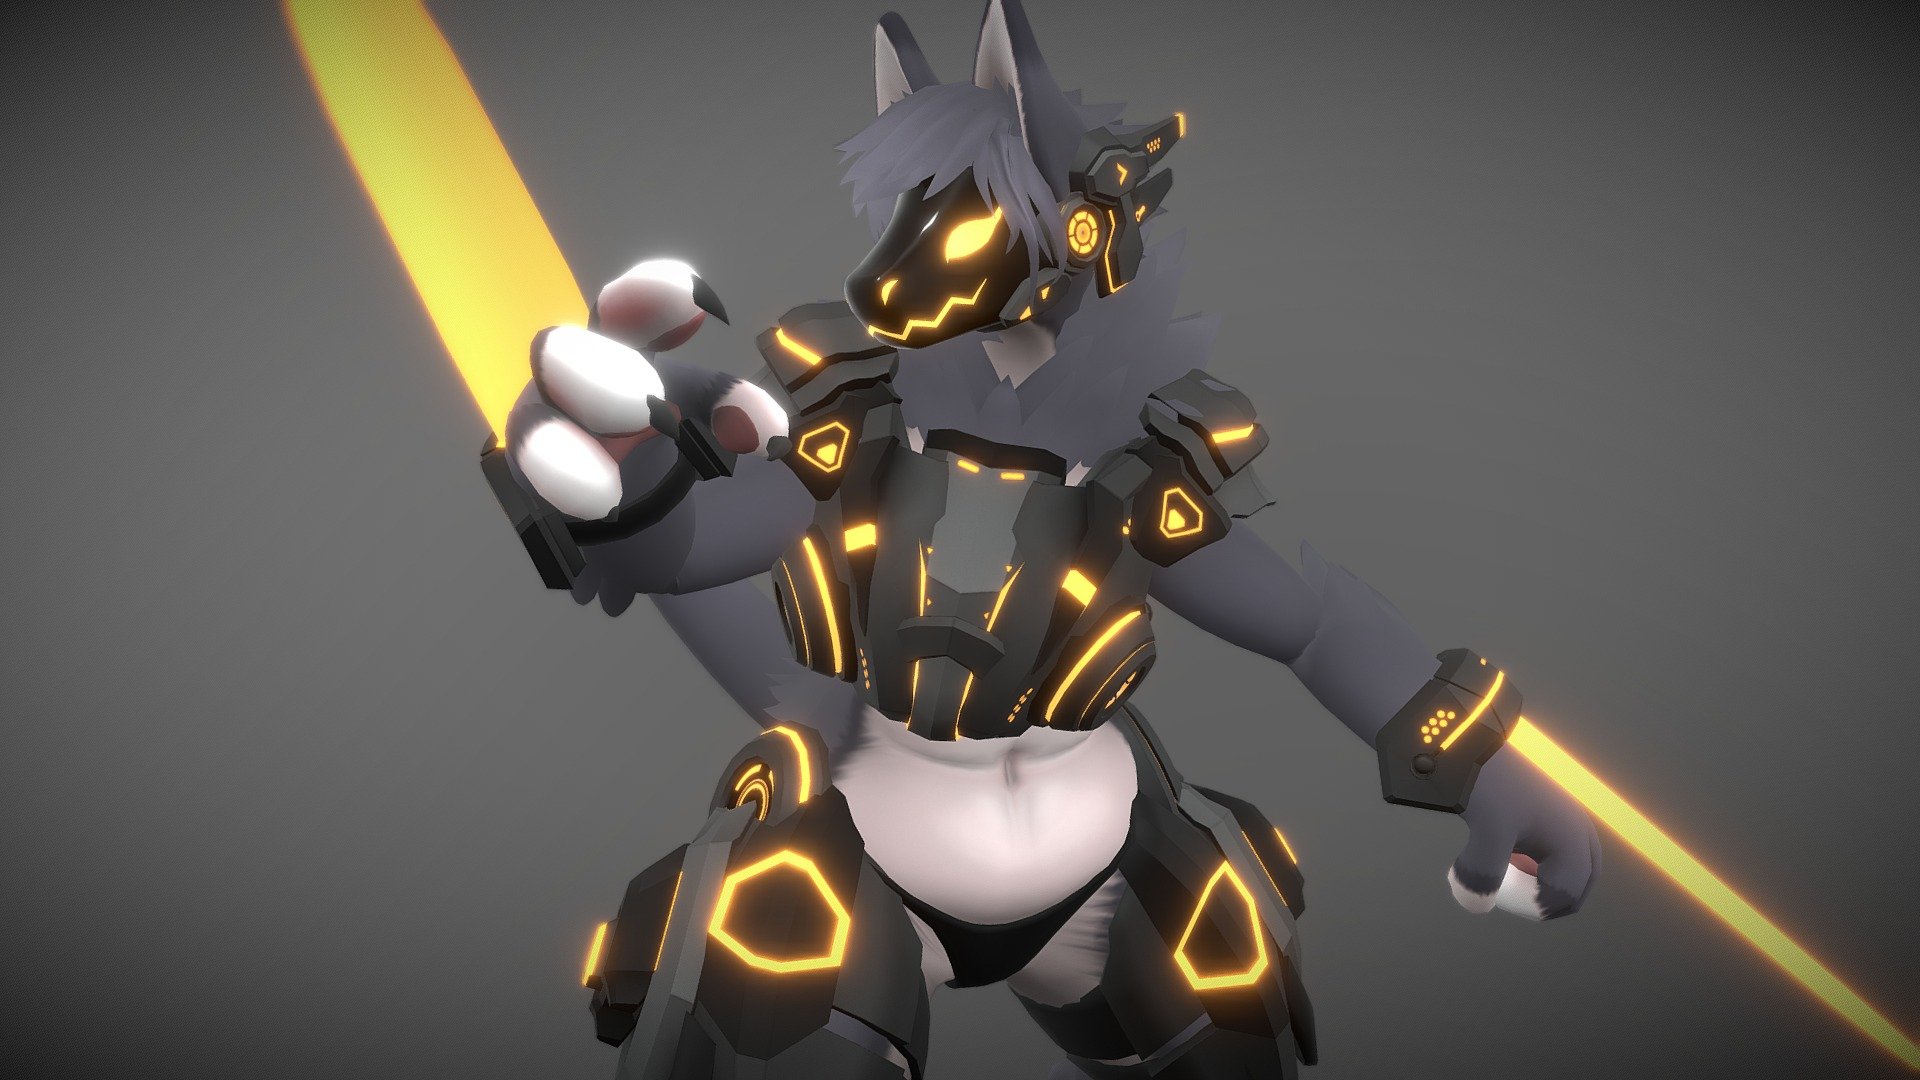 Tough motherly beast of a unit, this false protogen is ready for combat!

This VRChat model is one of my personal ones, I've made another version primarily as a base on my gumroad store.

Made with Blender, textured in Substance Painter 3d model